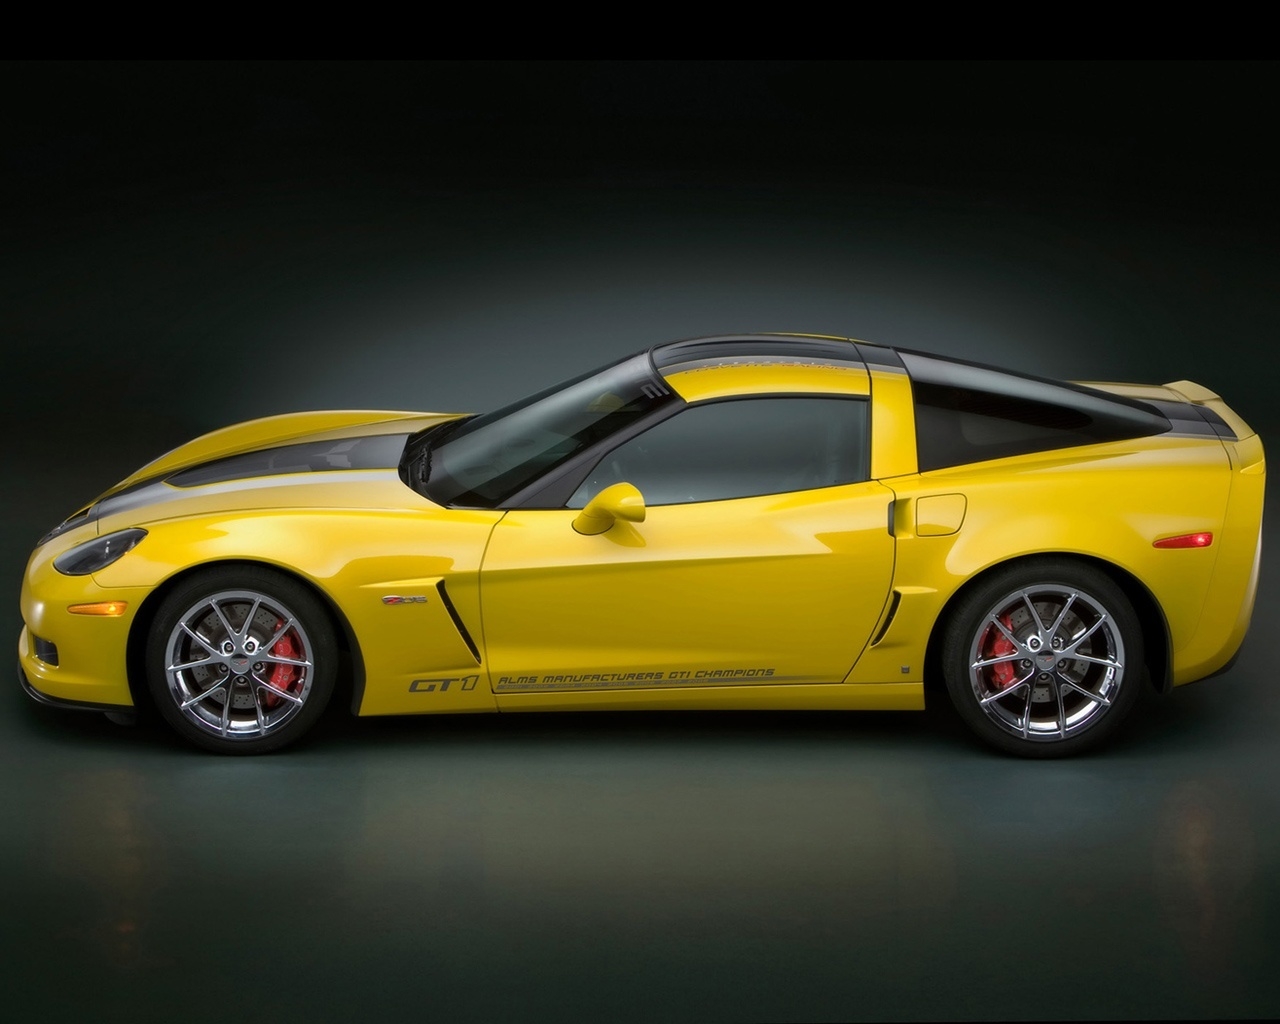 Corvette GT1 Championship Edition Side 2009 for 1280 x 1024 resolution